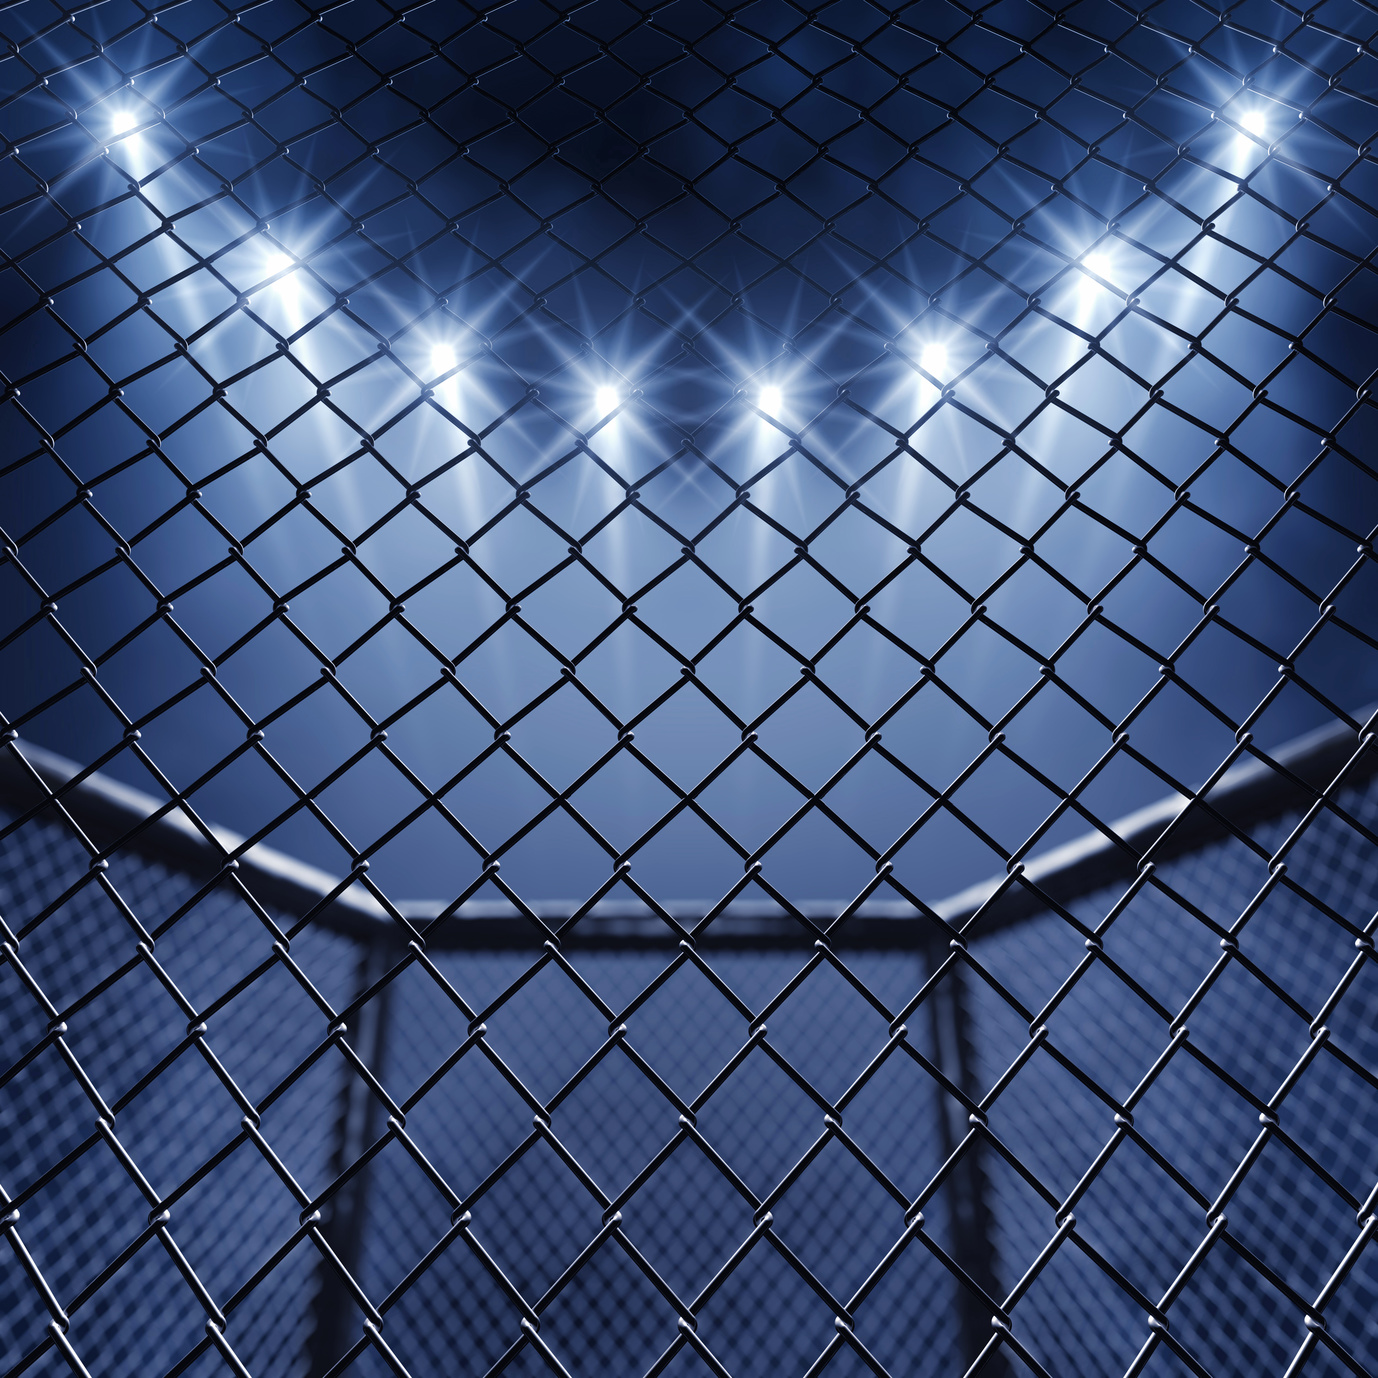 MMA cage and floodlights